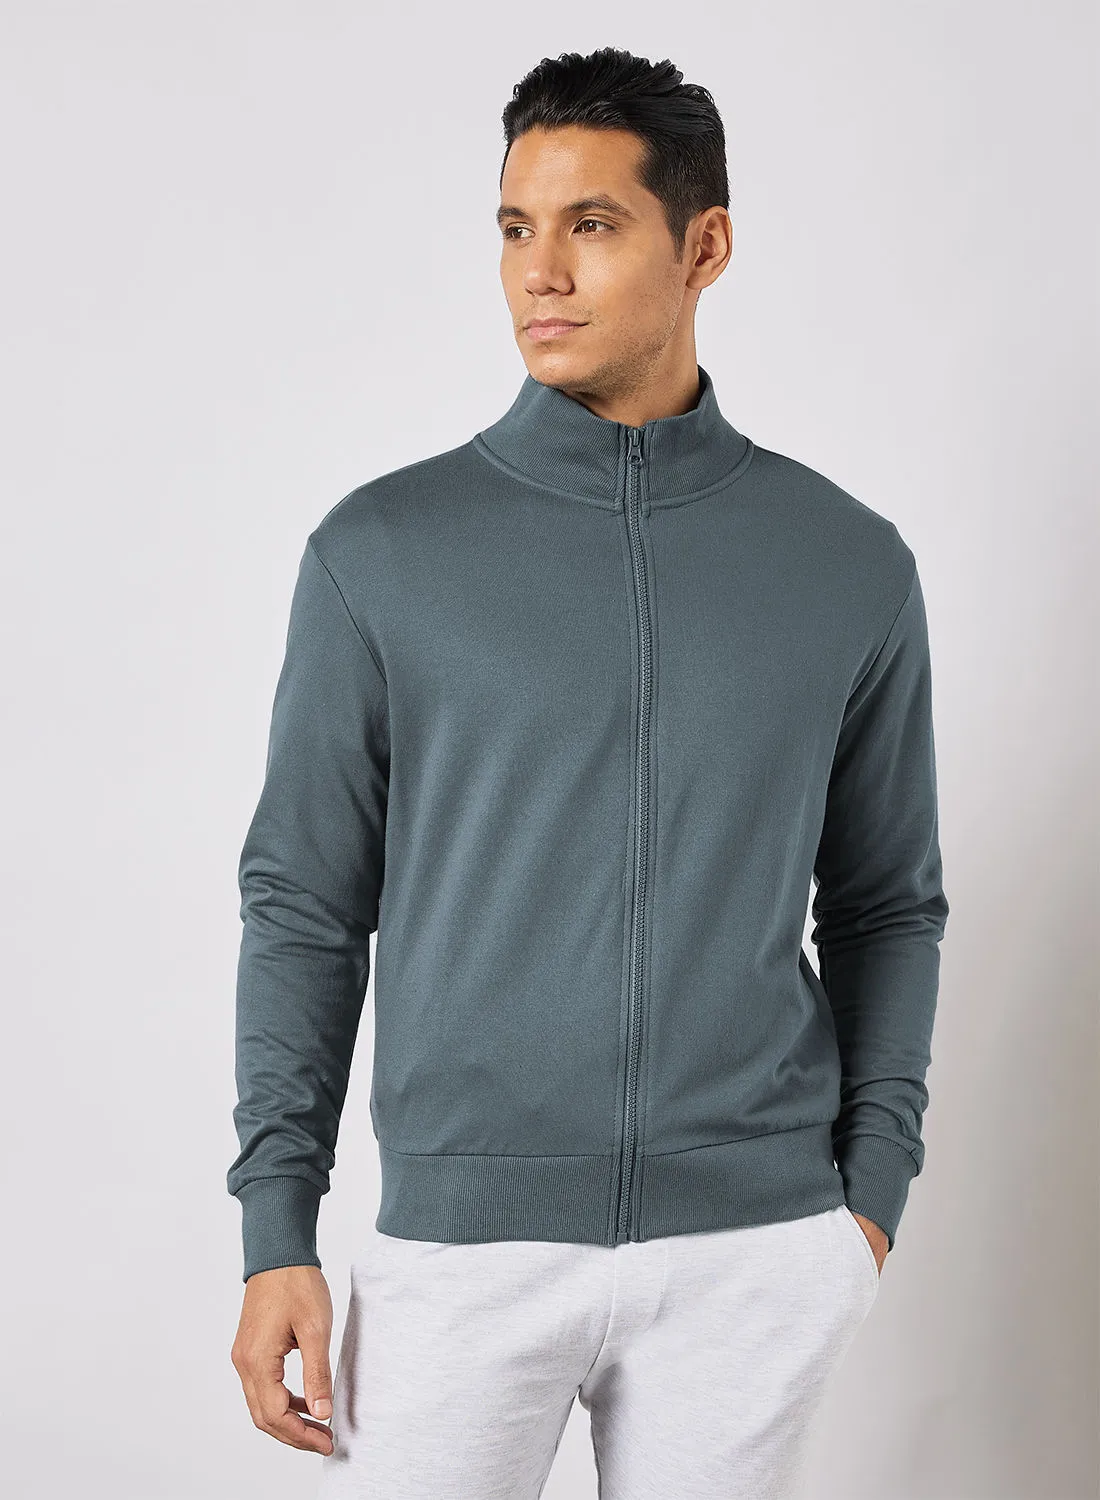 Noon East Men's Long Sleeve High Neck Jacket With Zip and Rib Details Pine